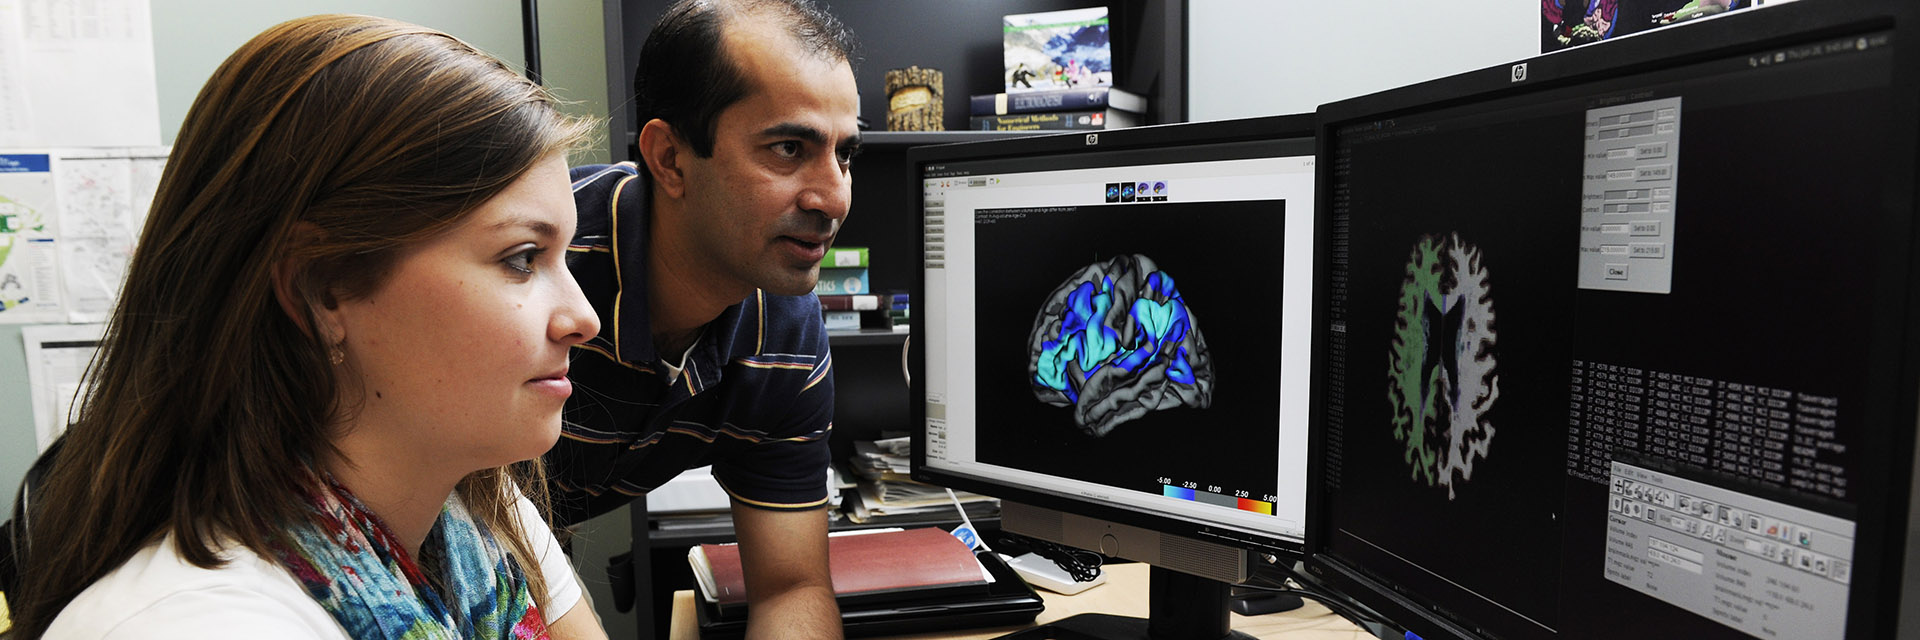 Image from the IEEM brainlab